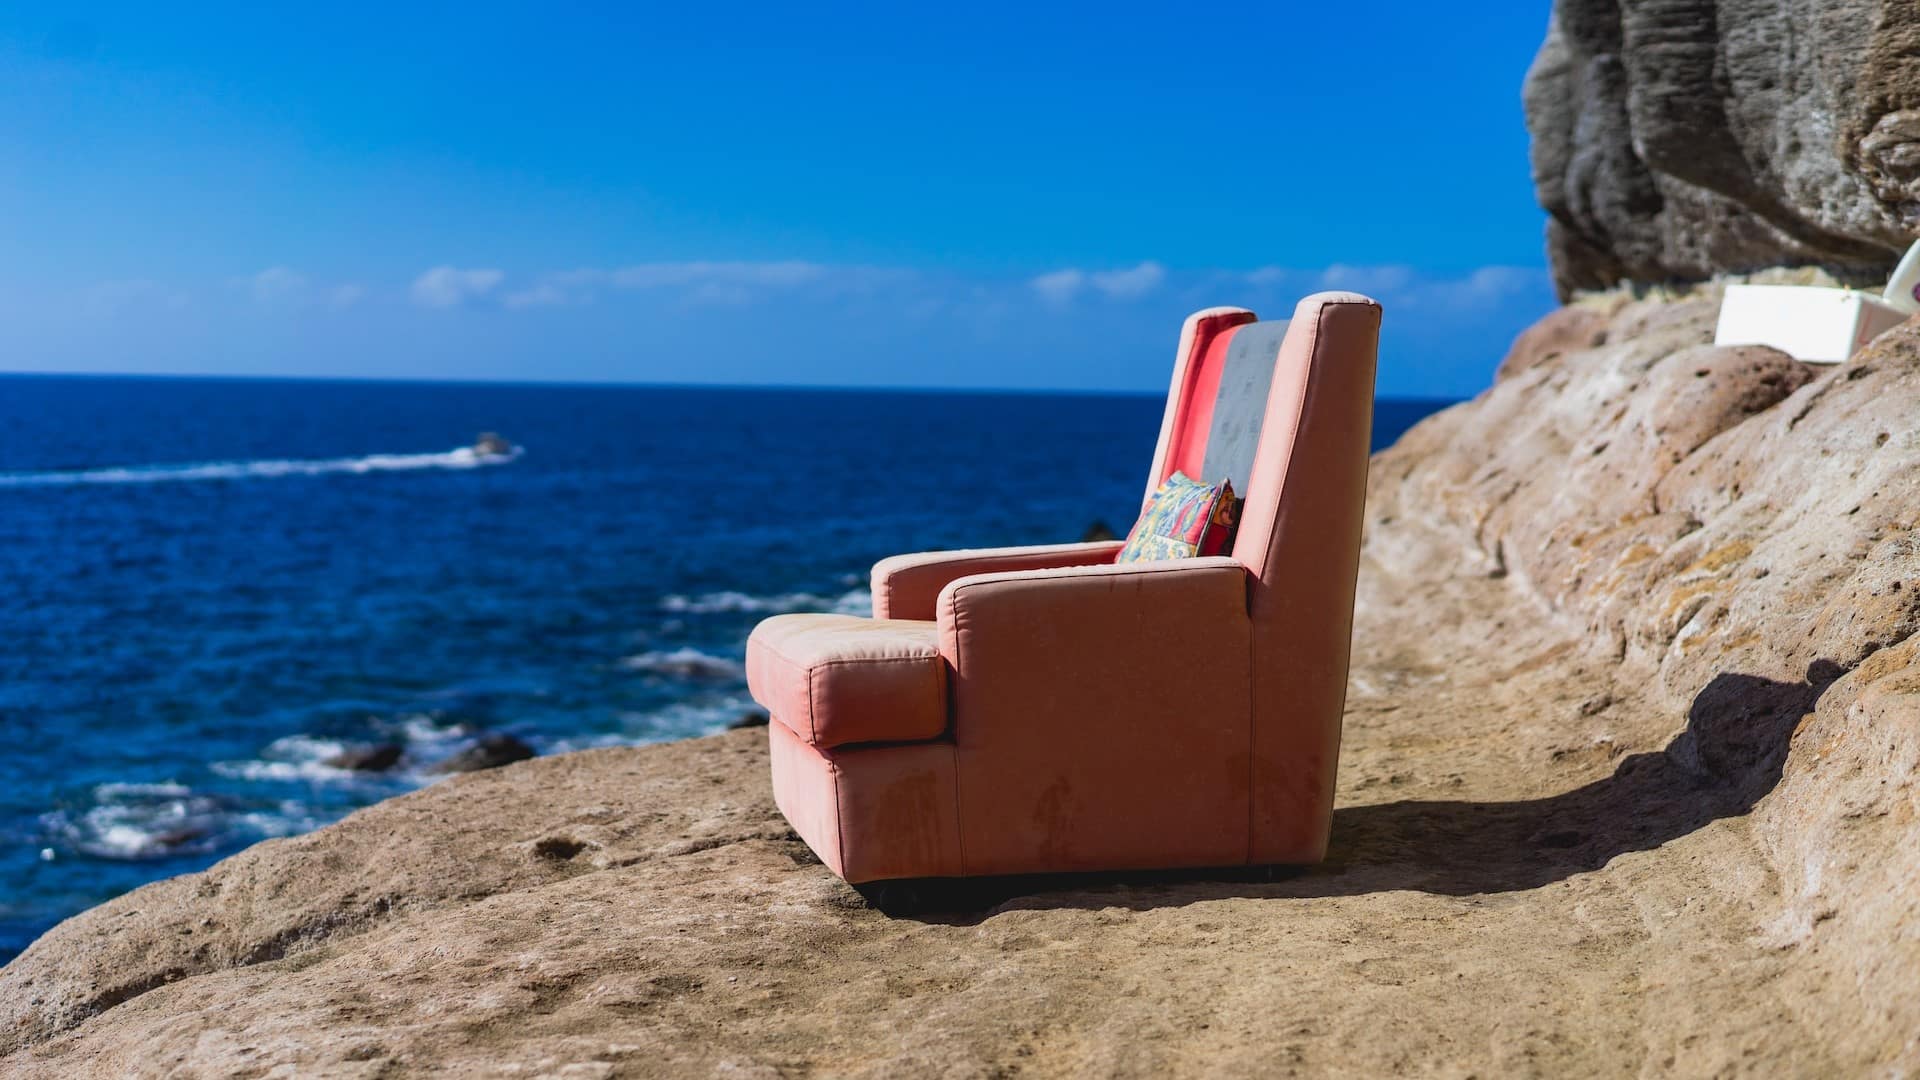 Image: A pink comfy chair, out of place, sitting on a rock by a beach. It asks the question: what else could we do from the couch, other than watch the news?